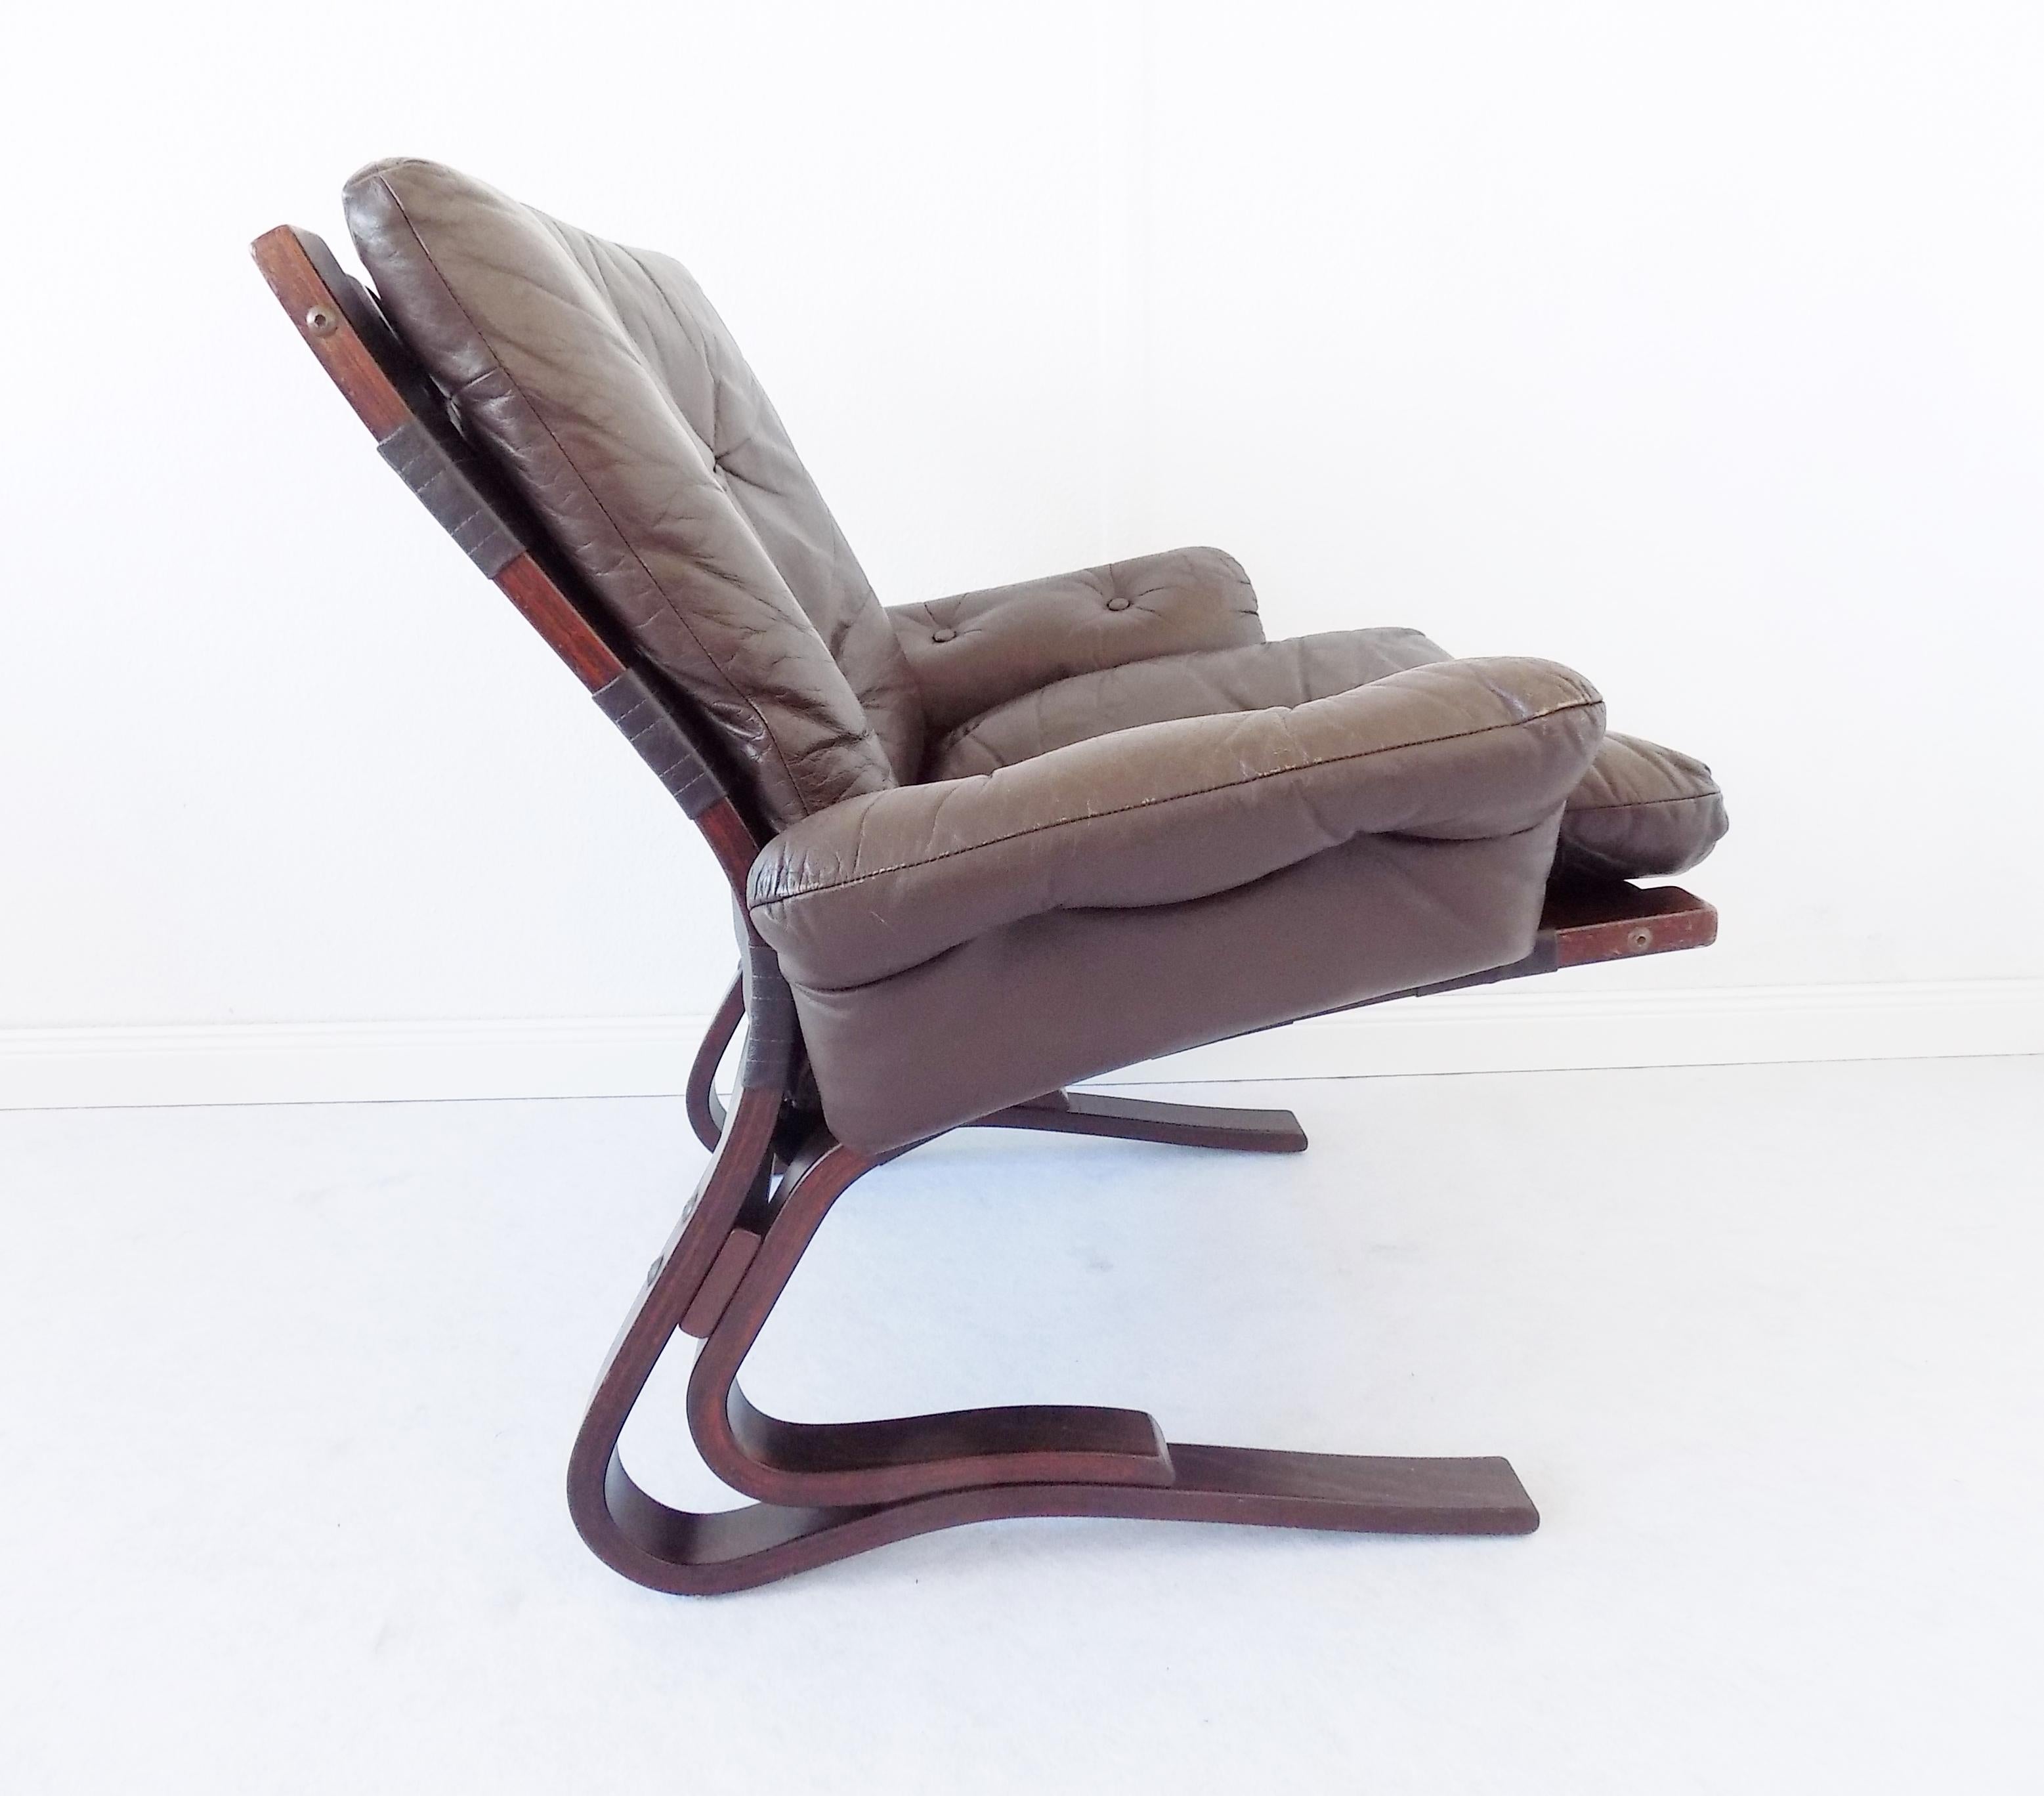 Swinging Kengu armchair designed by Elsa and Nordahl Solheim for the Norwegian manufacturer Rykken in the 1960s. This chair is in excellent condition, the chocolate brown leather is very soft. Jacaranda wood without any bigger scratches.

Actually